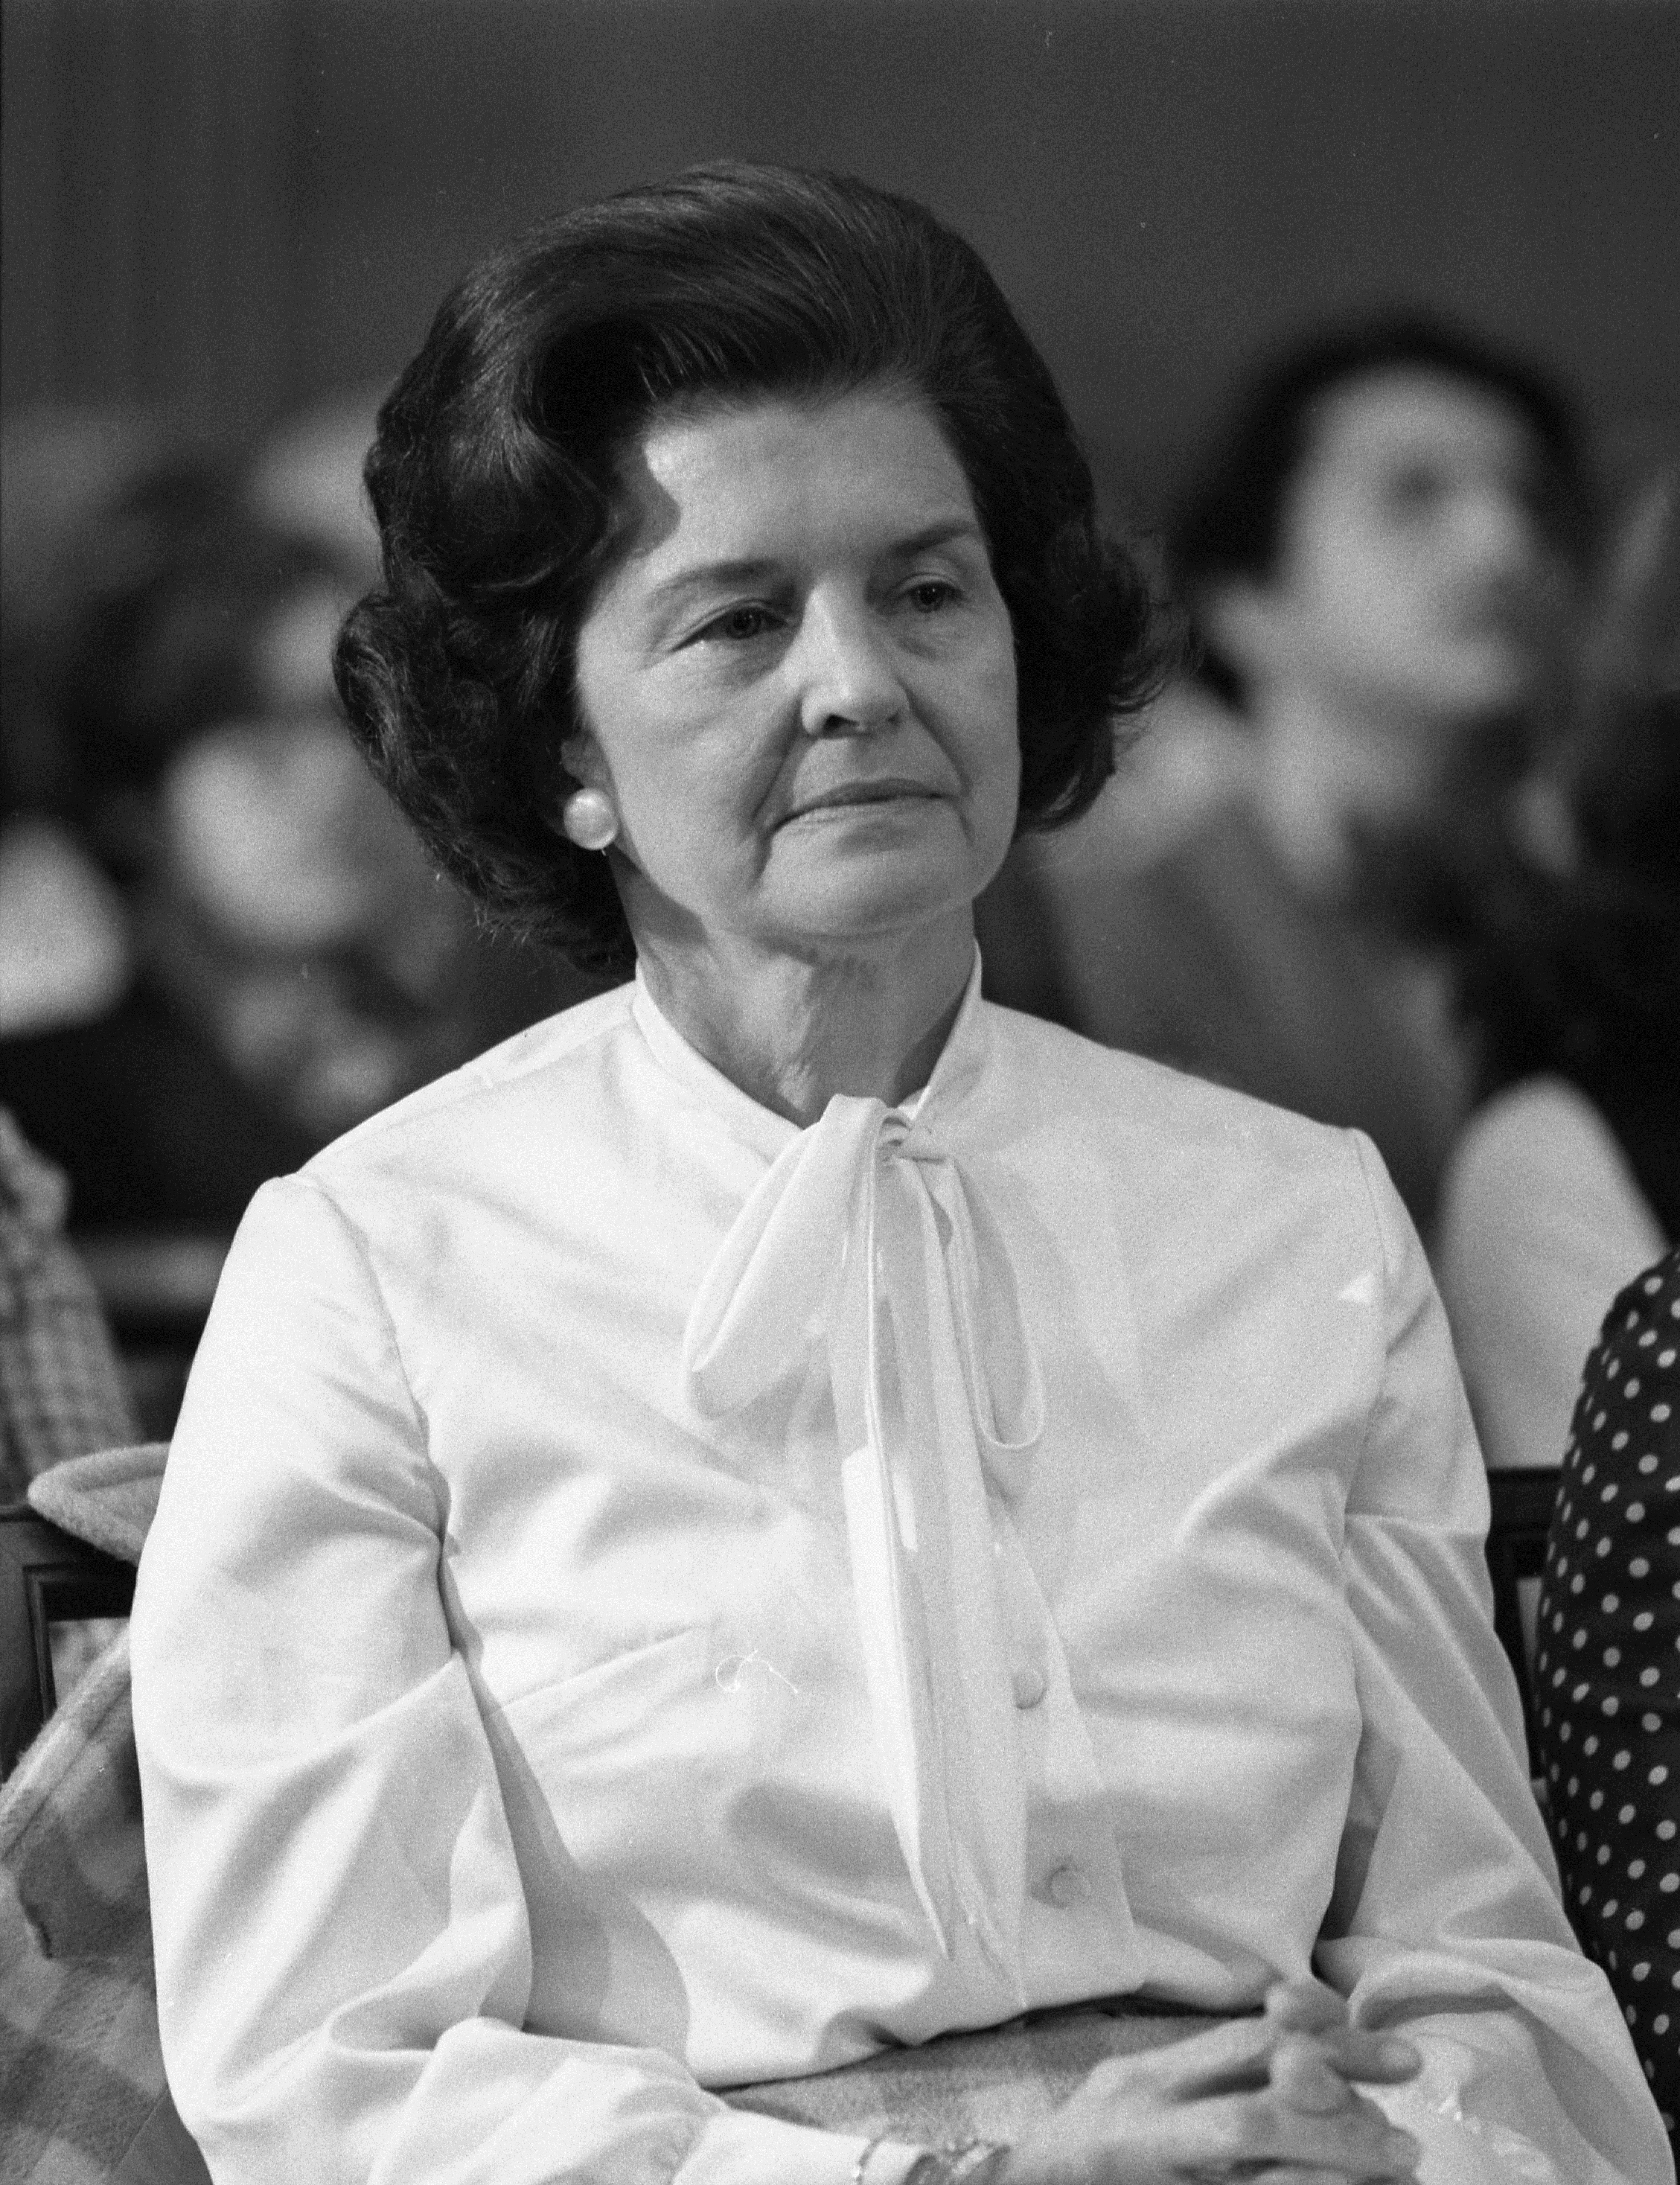 Betty Ford at Gerald R. Ford's Vice Presidential hearing, 11/1973.